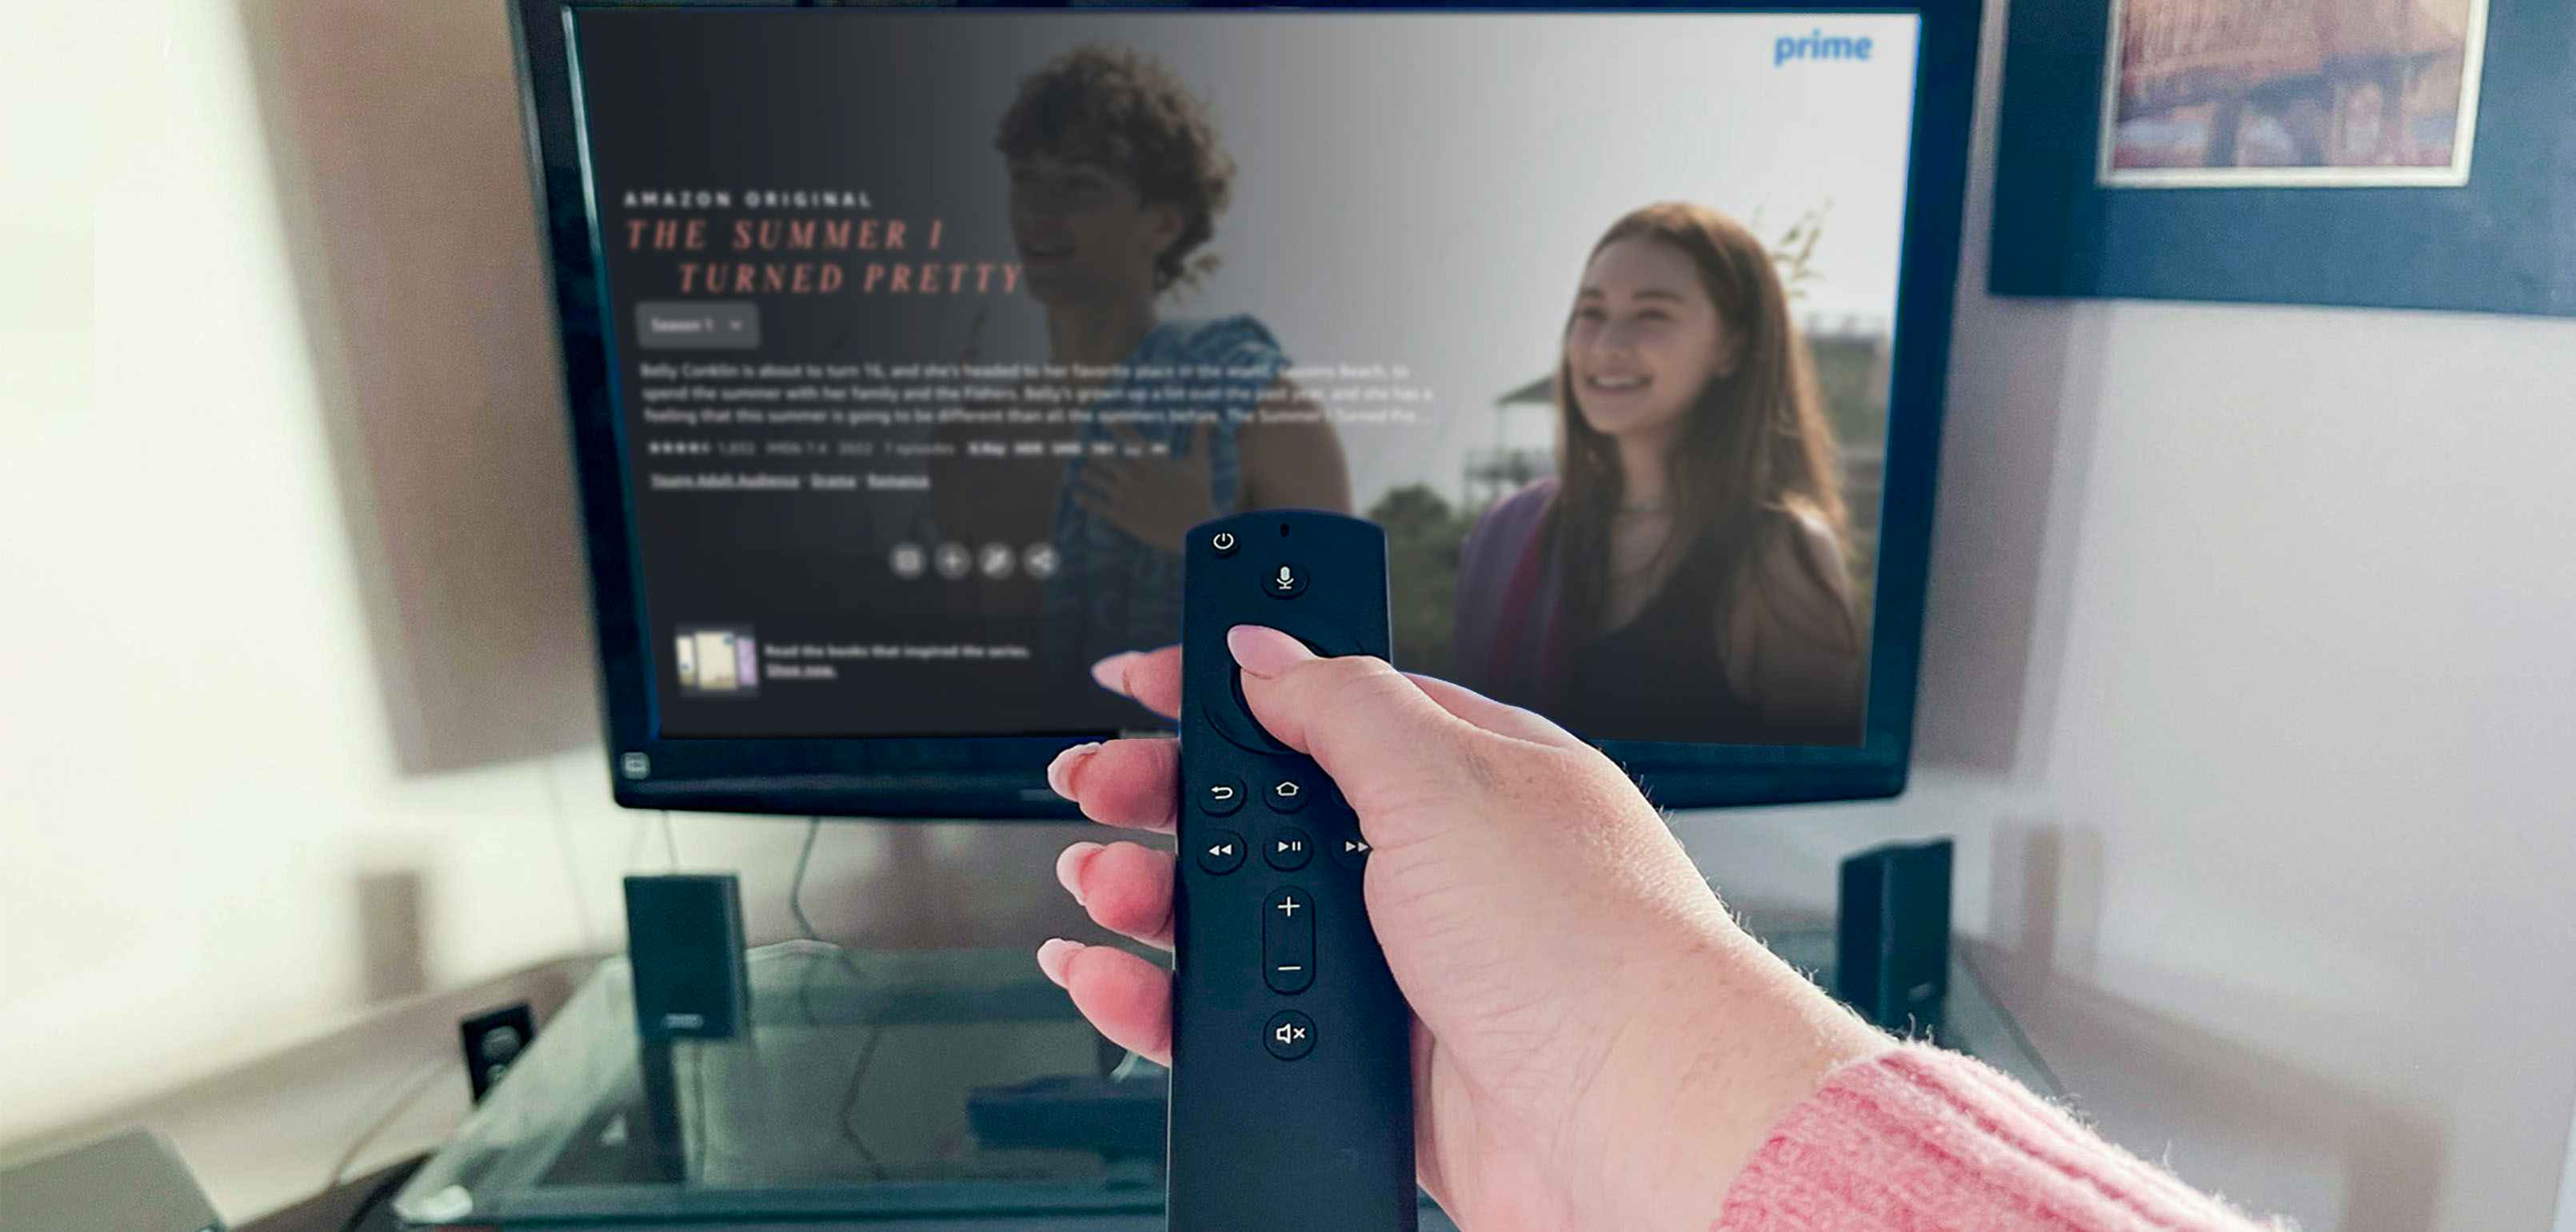 Hand holding a firestick remote pointed towards the tv screen